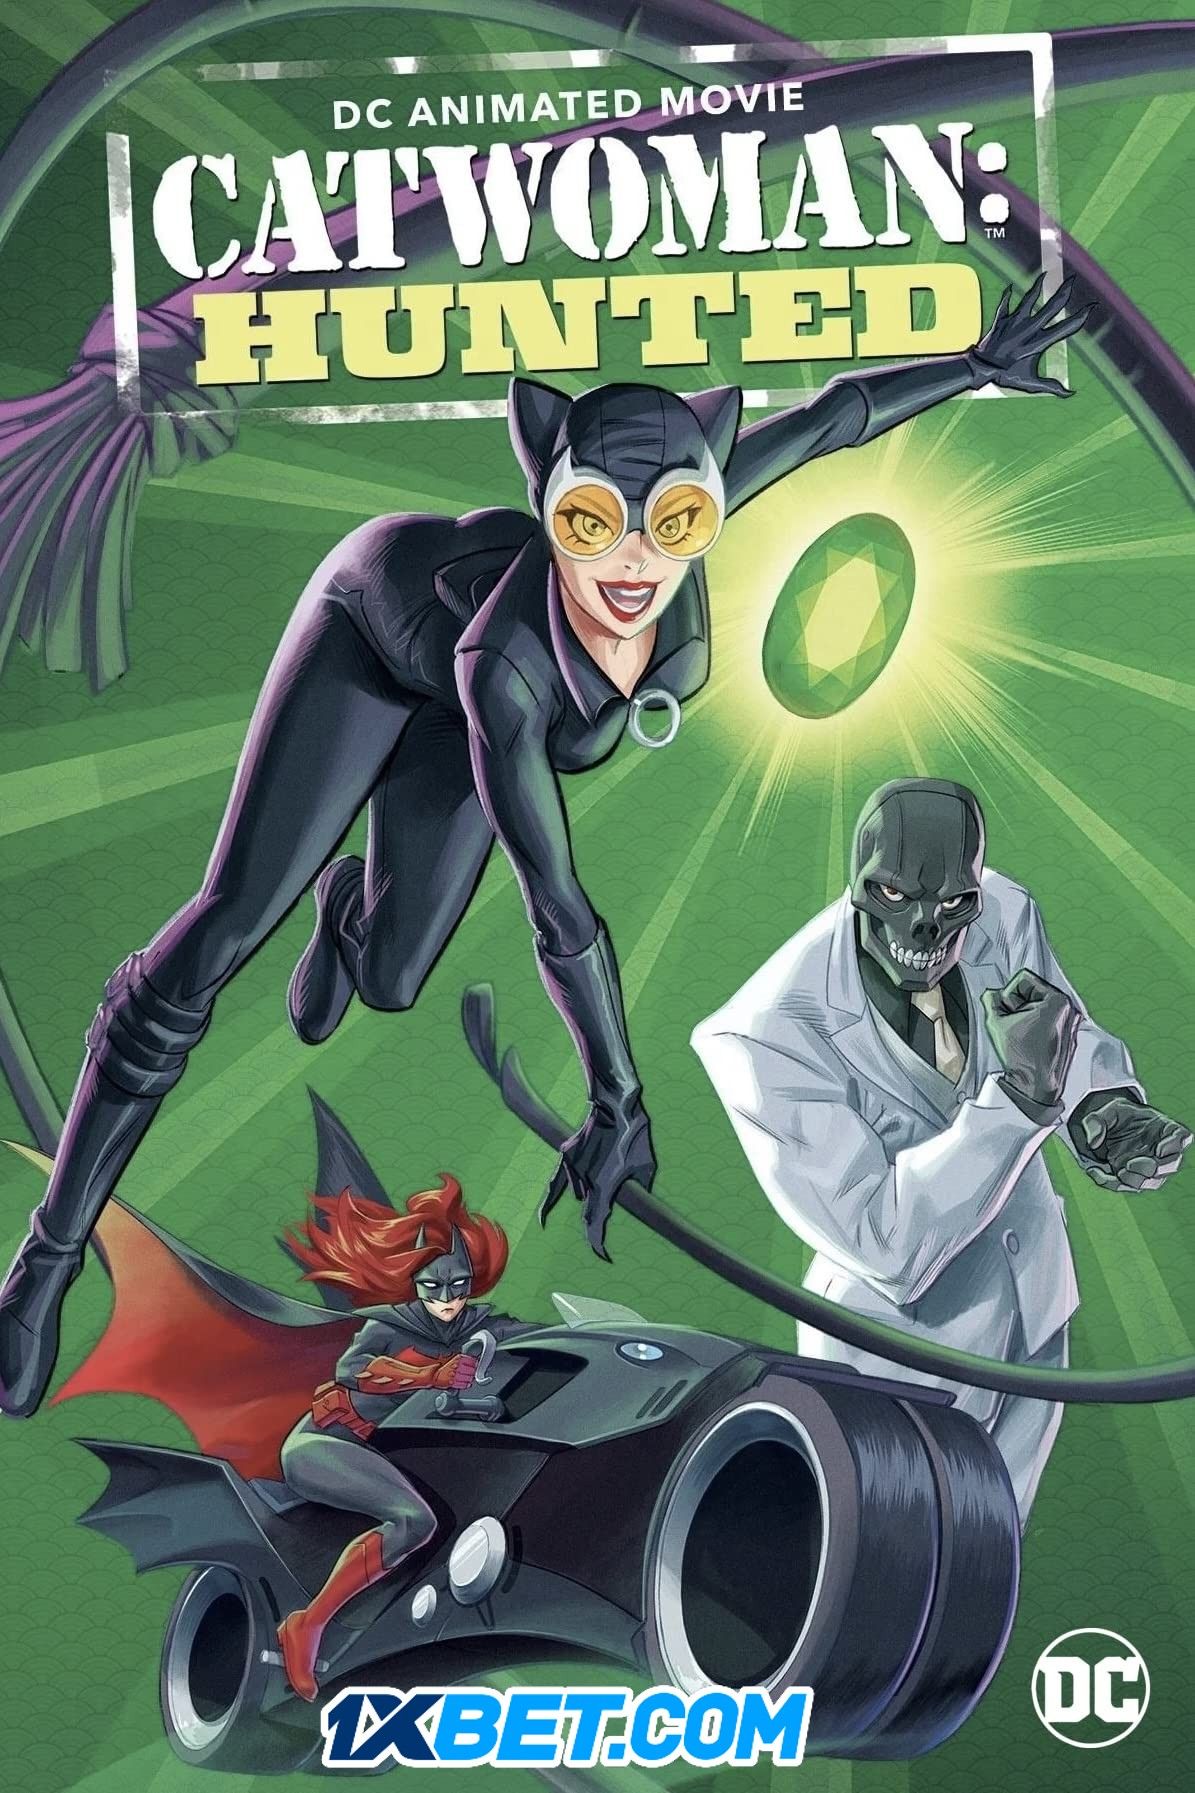 Catwoman: Hunted (2022) Tamil (Voice Over) Dubbed BluRay download full movie